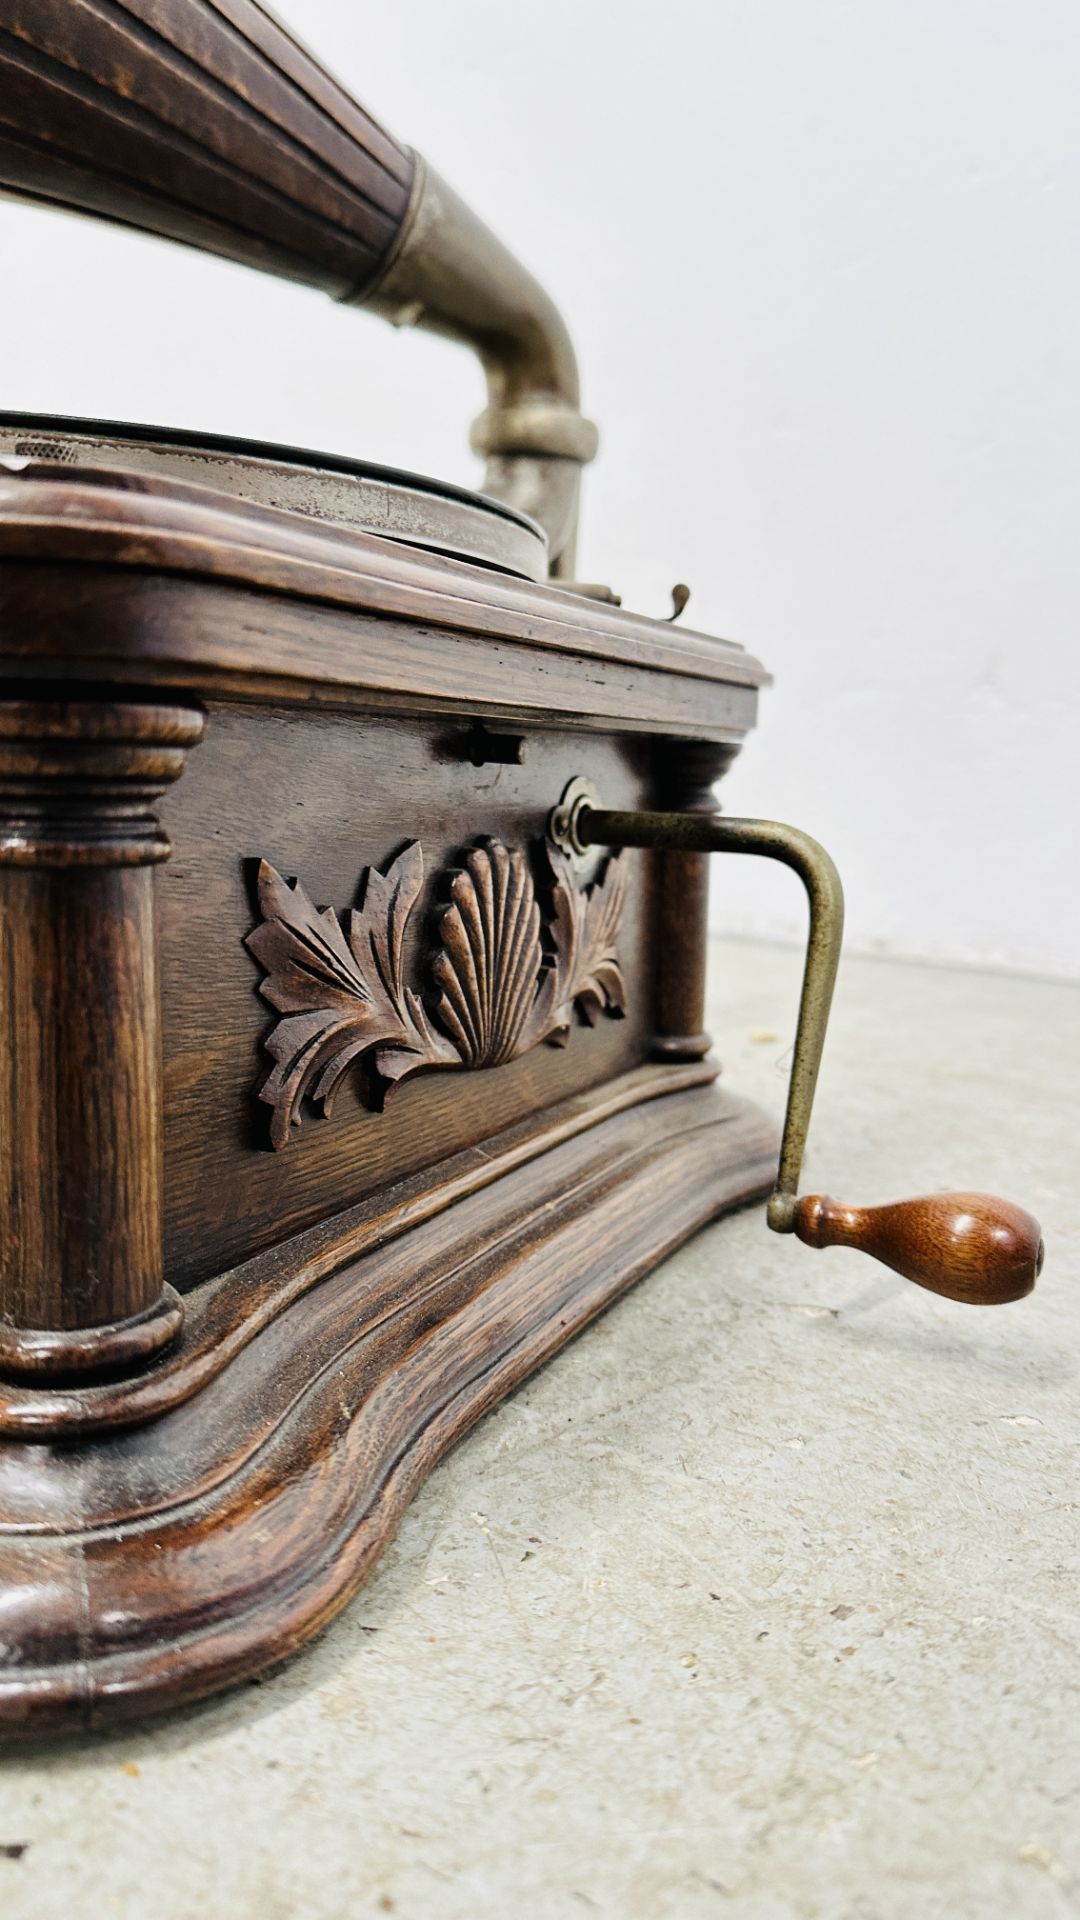 EARLY HMV GRAMOPHONE COMPANY OAK CASED "THE GRAMOPHONE Co" GRAMOPHONE WITH HORN. - Image 7 of 9